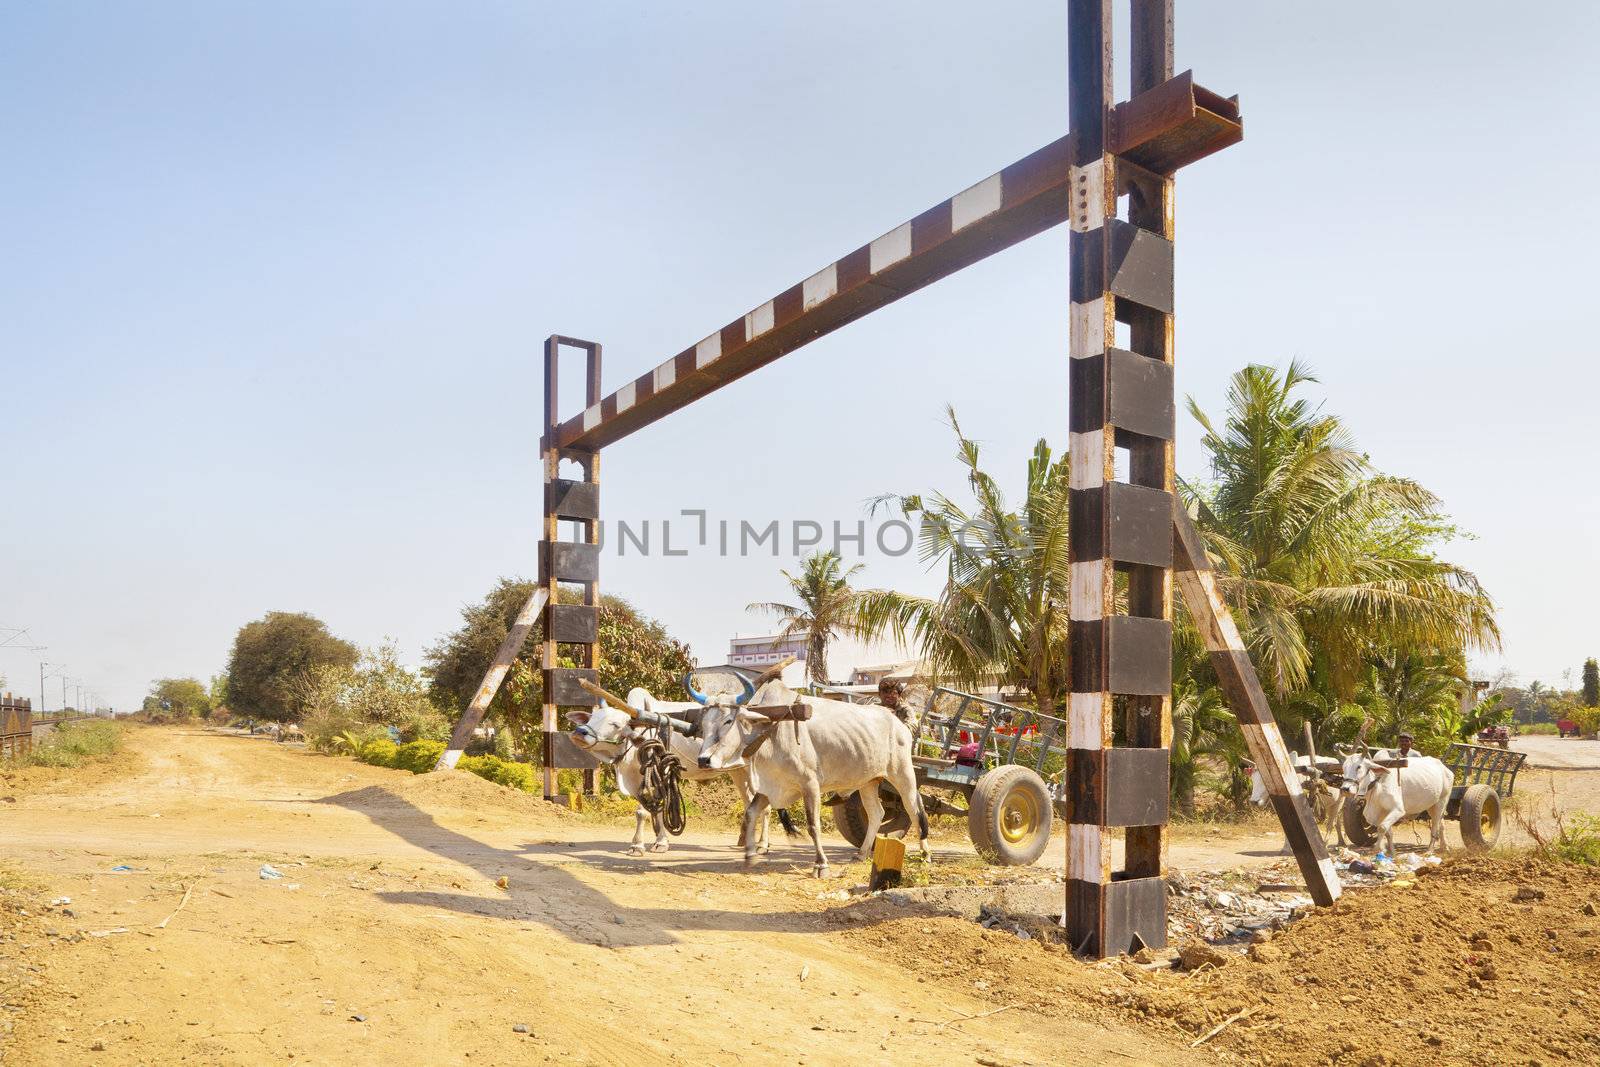 A pair of Bullock carts the local infrastructure risk danger on the approach to an unmanned rail crossing passing by a hinterland village in Gujarat india